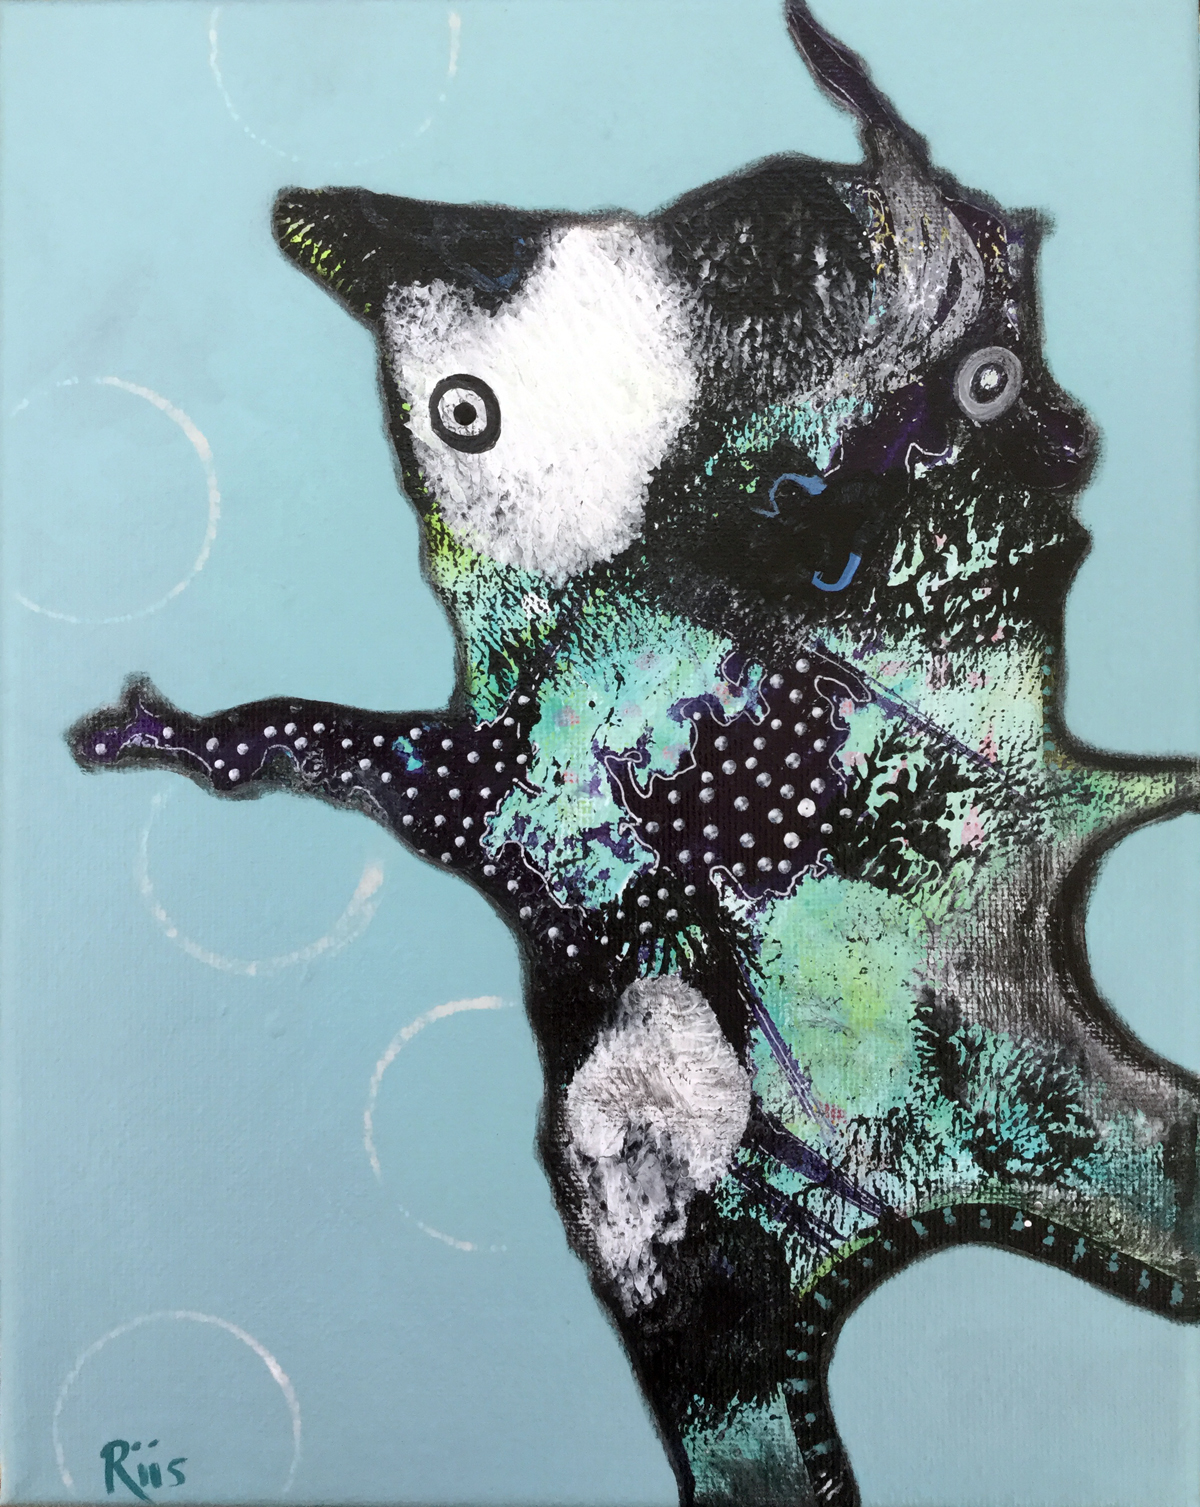 Mixed media painting of an abstract animal figure standing on one foot with arms outstretched, looking happy.